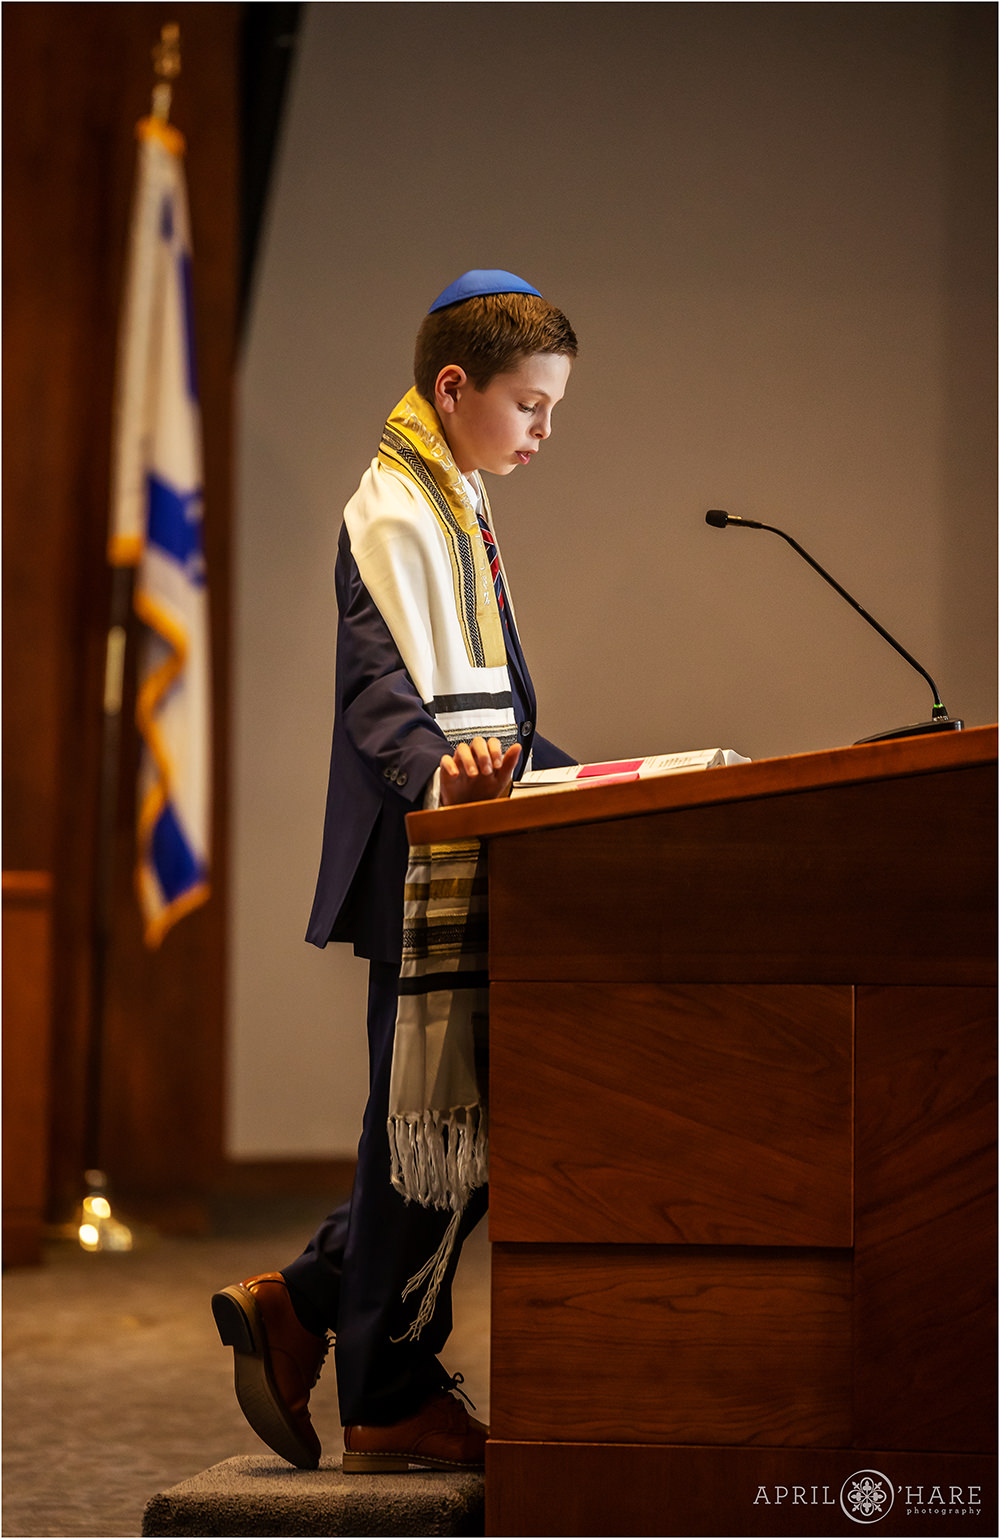 Bar mitzvah boy practices his readings in preparation for his bar mitzvah service at Temple Sinai in Denver, CO